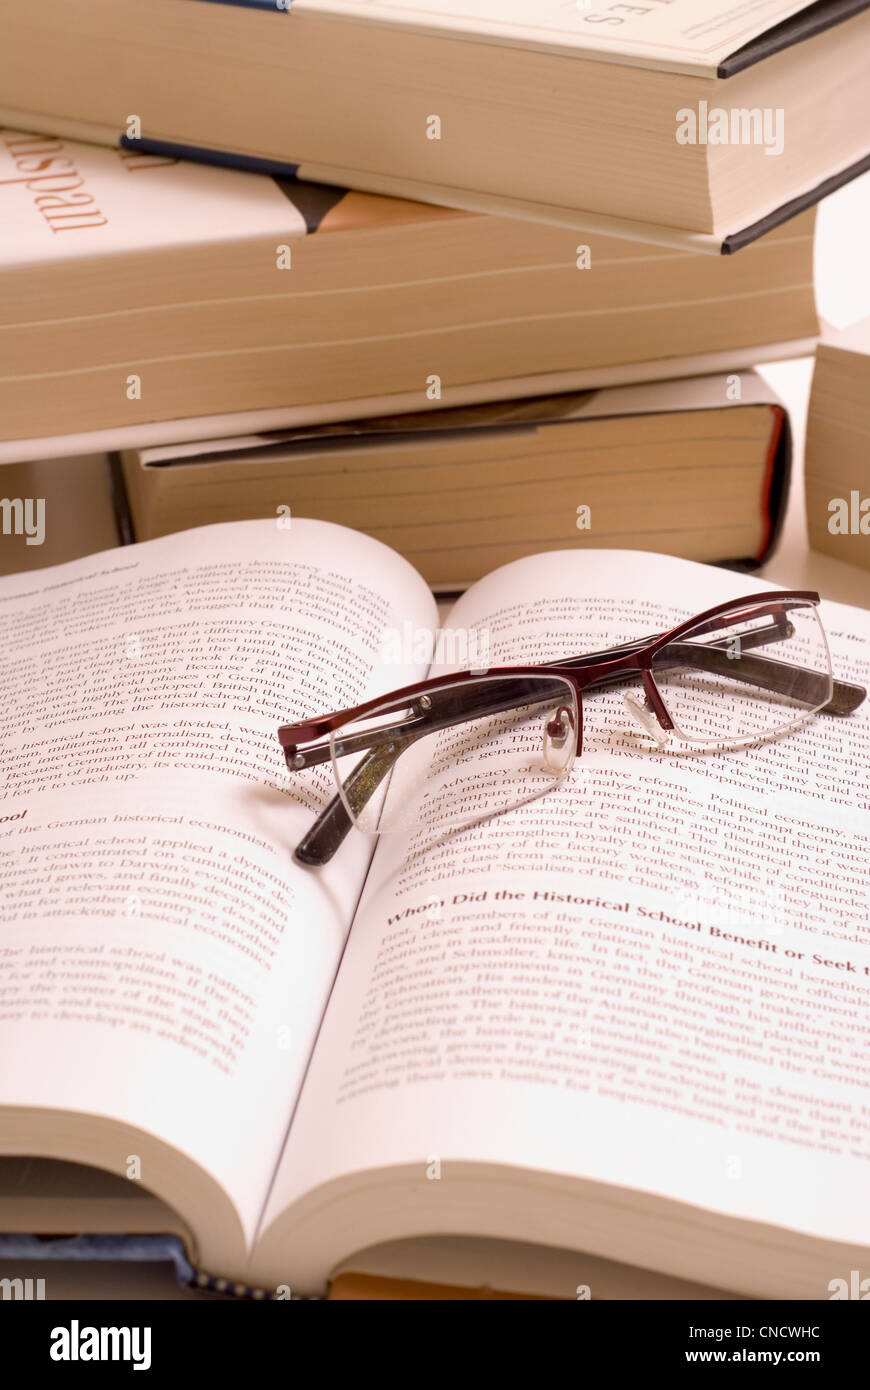 Pile of books with open book and reading glasses. Stock Photo